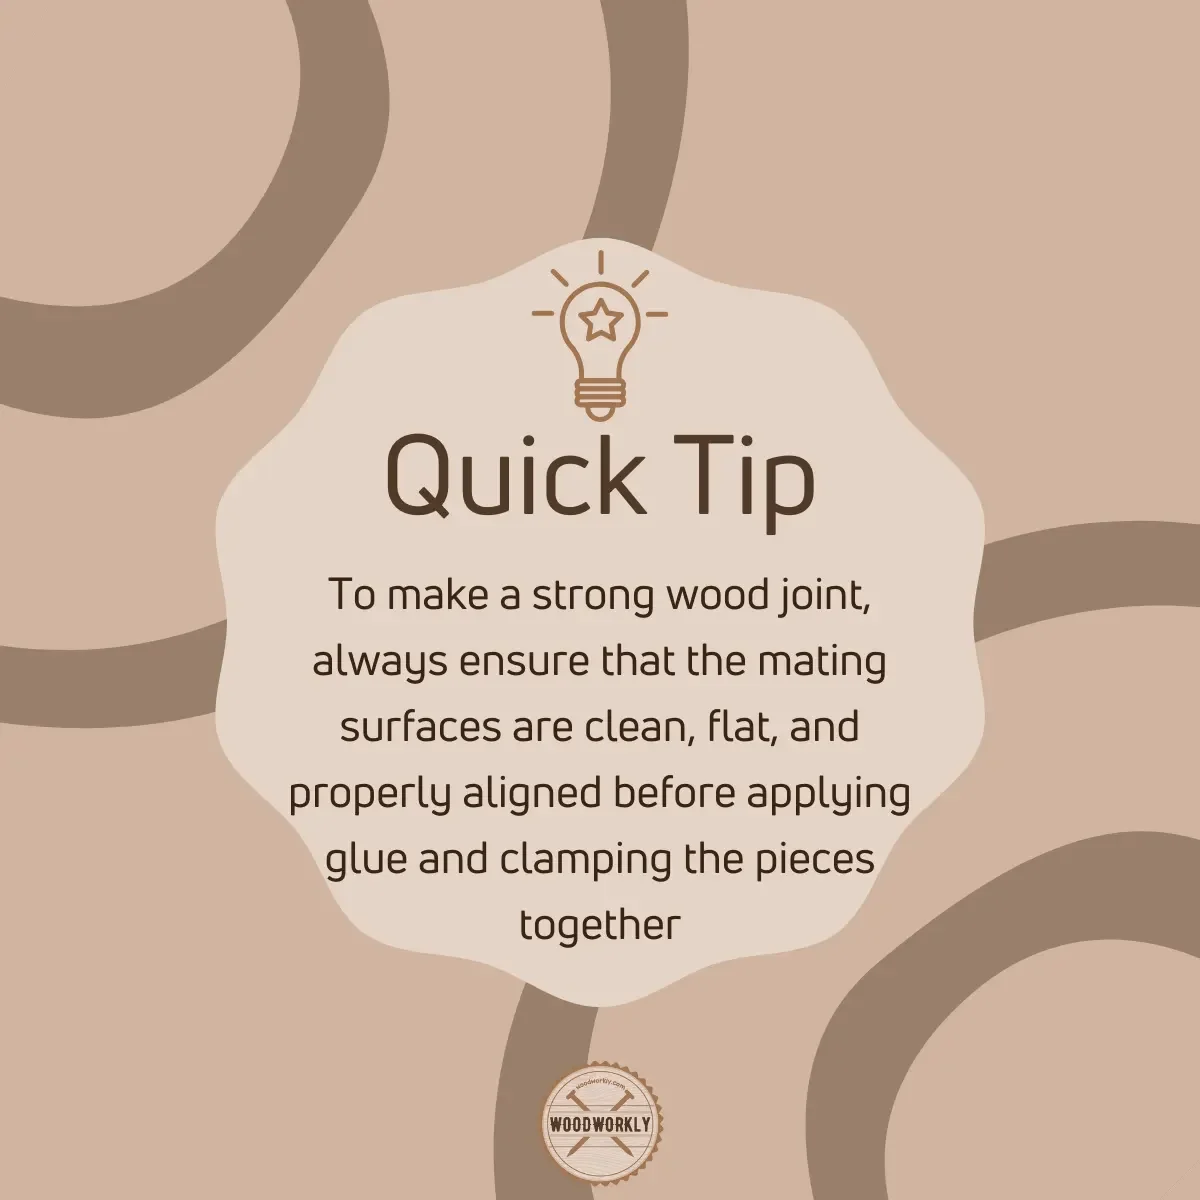 Tip to make a strong wood joint